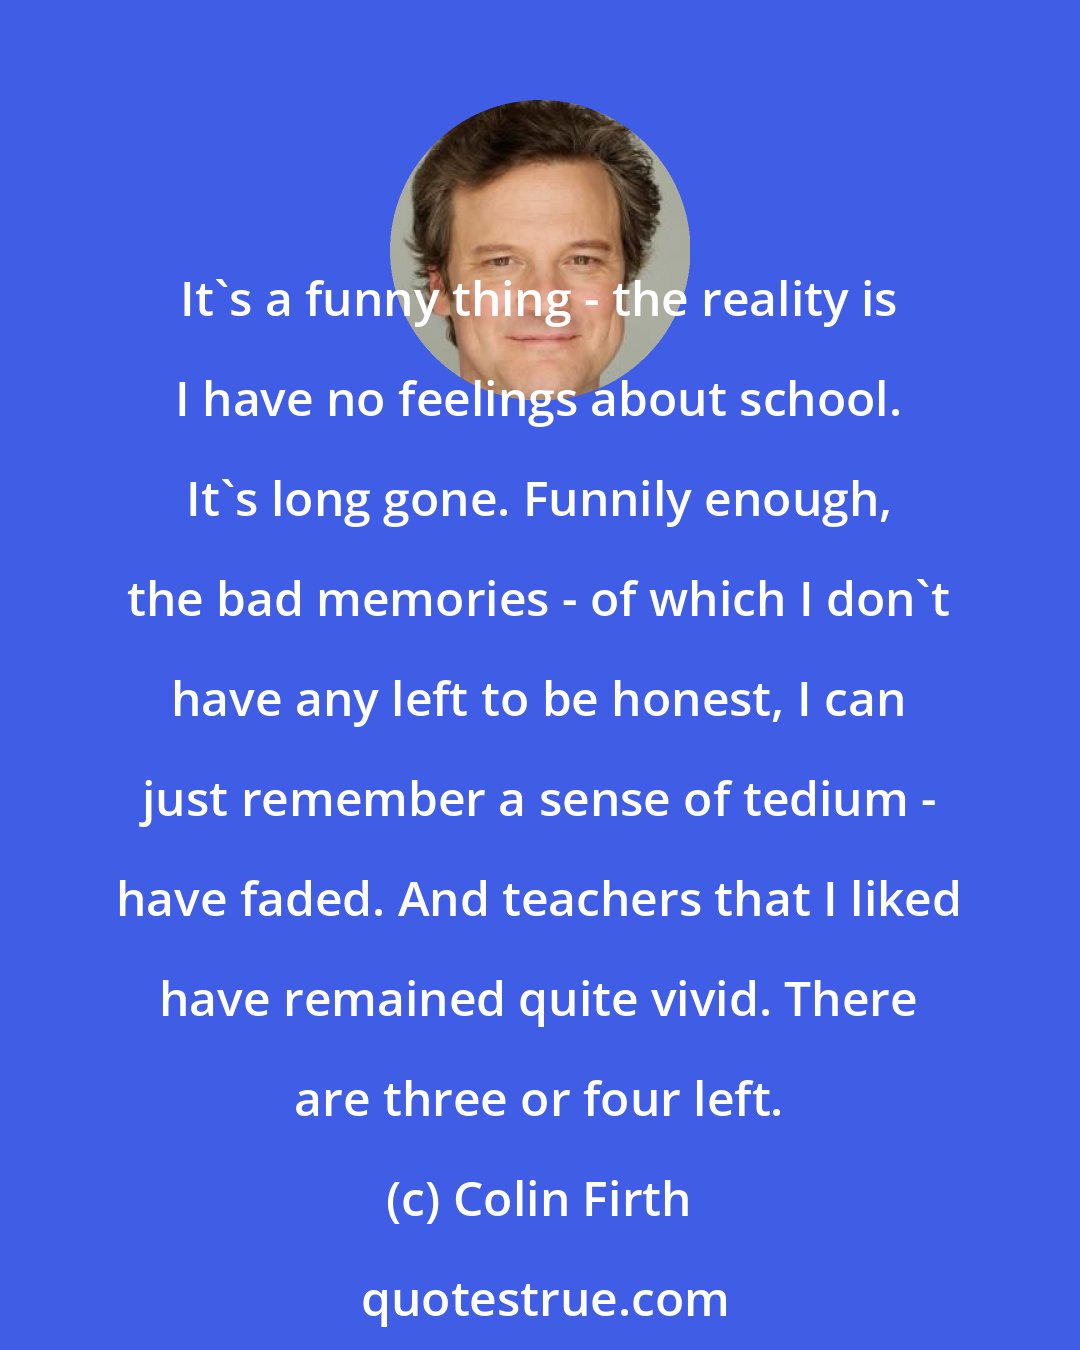 Colin Firth: It's a funny thing - the reality is I have no feelings about school. It's long gone. Funnily enough, the bad memories - of which I don't have any left to be honest, I can just remember a sense of tedium - have faded. And teachers that I liked have remained quite vivid. There are three or four left.